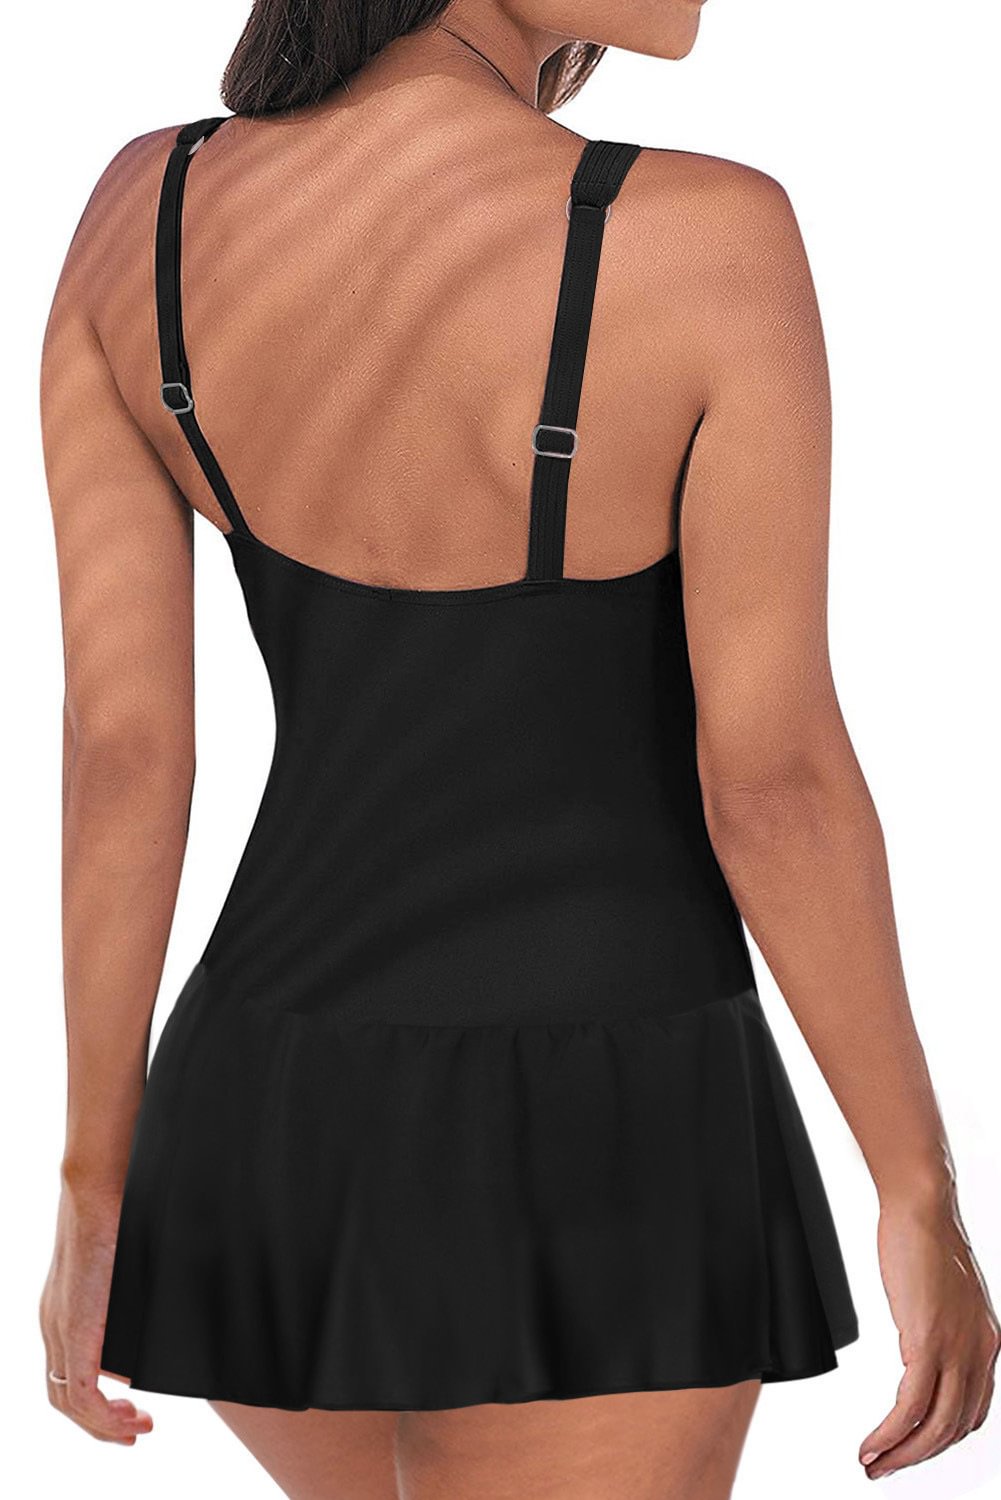 Womens Solid Ruched Swimdress Push Up Padded Sweetheart Neck Criss Cross One Piece Swimsuits